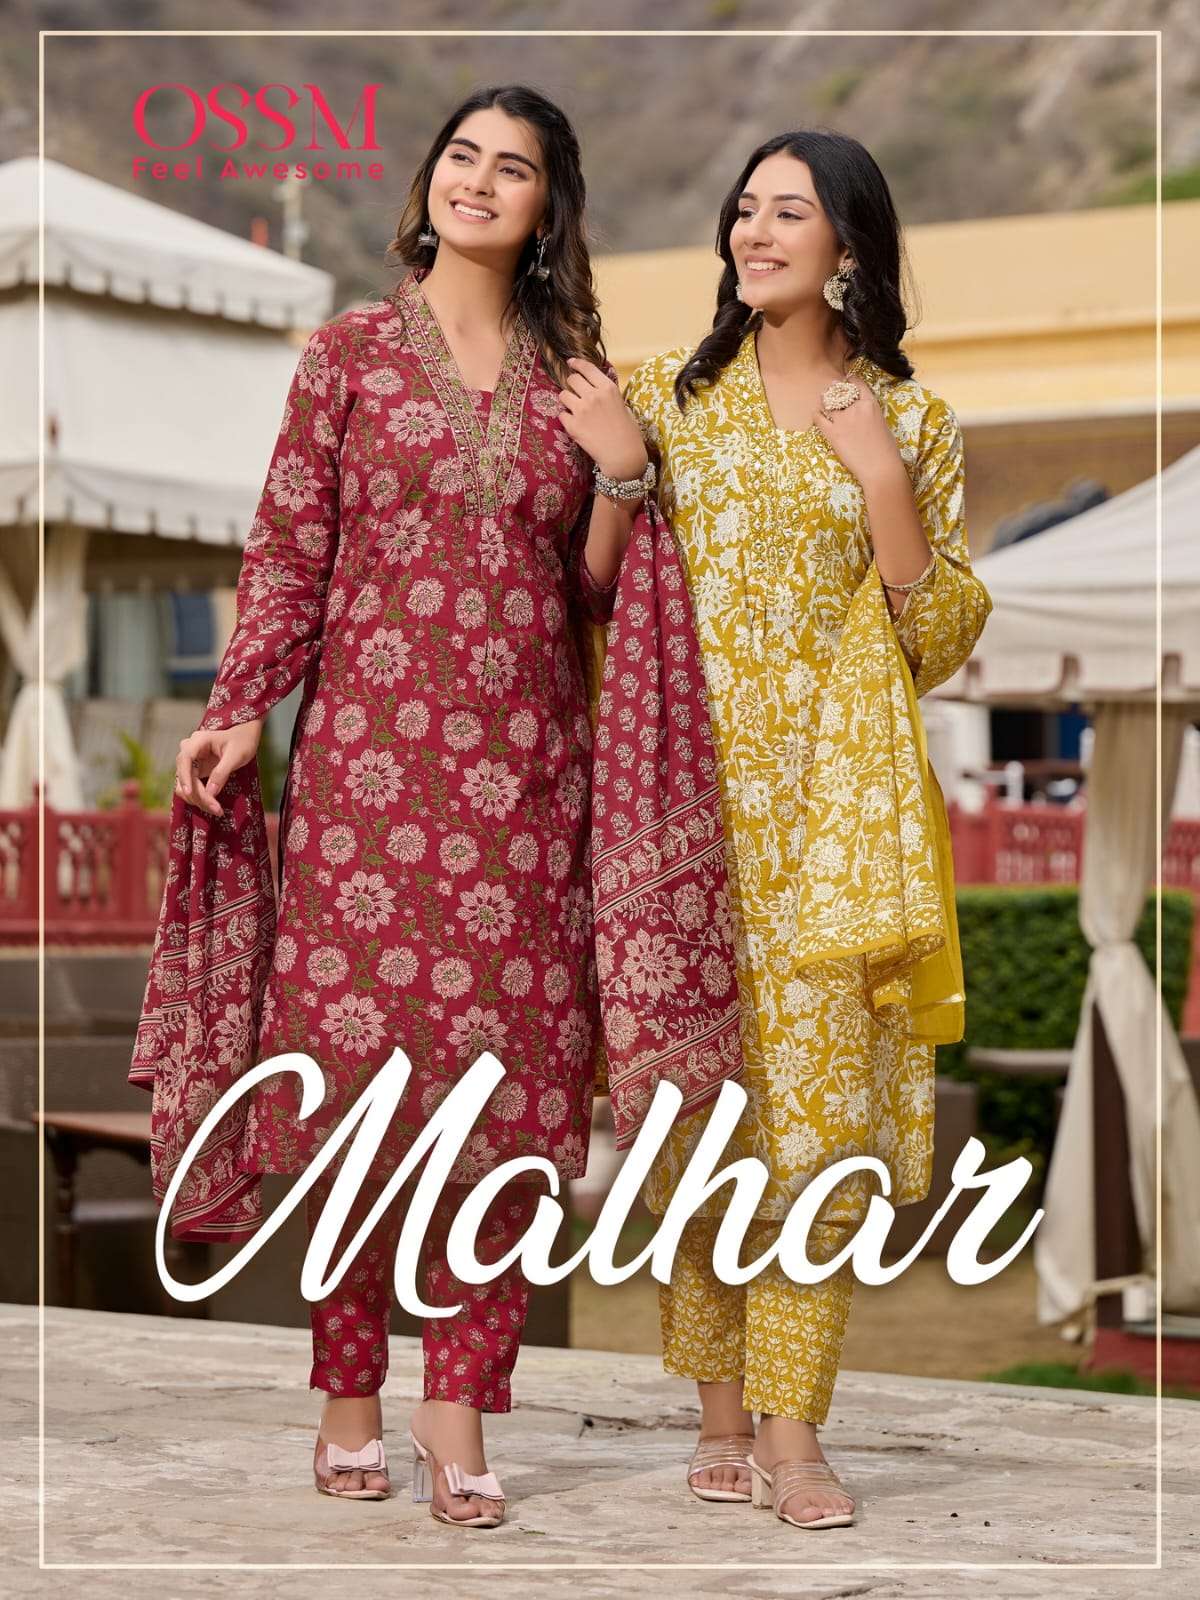 MALHAR COTTON PRINT EMBROIDERY WORK KURTI WITH PANT AND MAL COTTON DUPATTA BY OSSM BRAND WHOLESALER ...